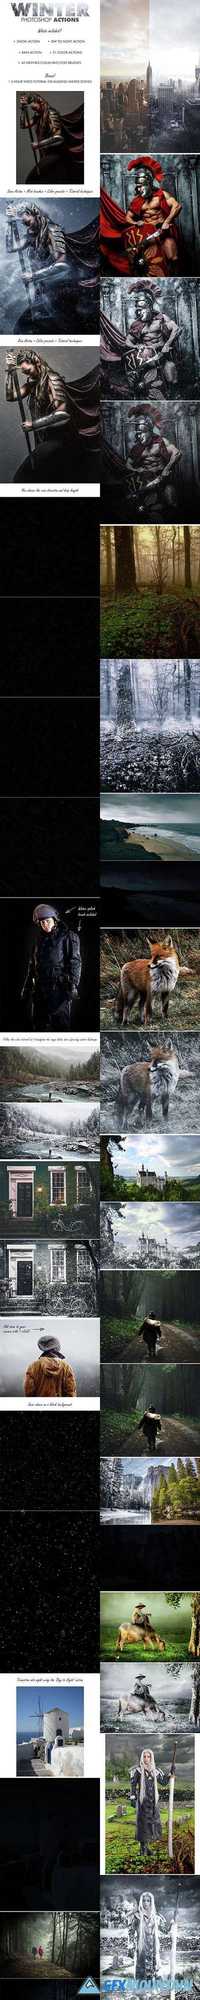 GraphicRiver - Winter Photoshop Actions 15462628